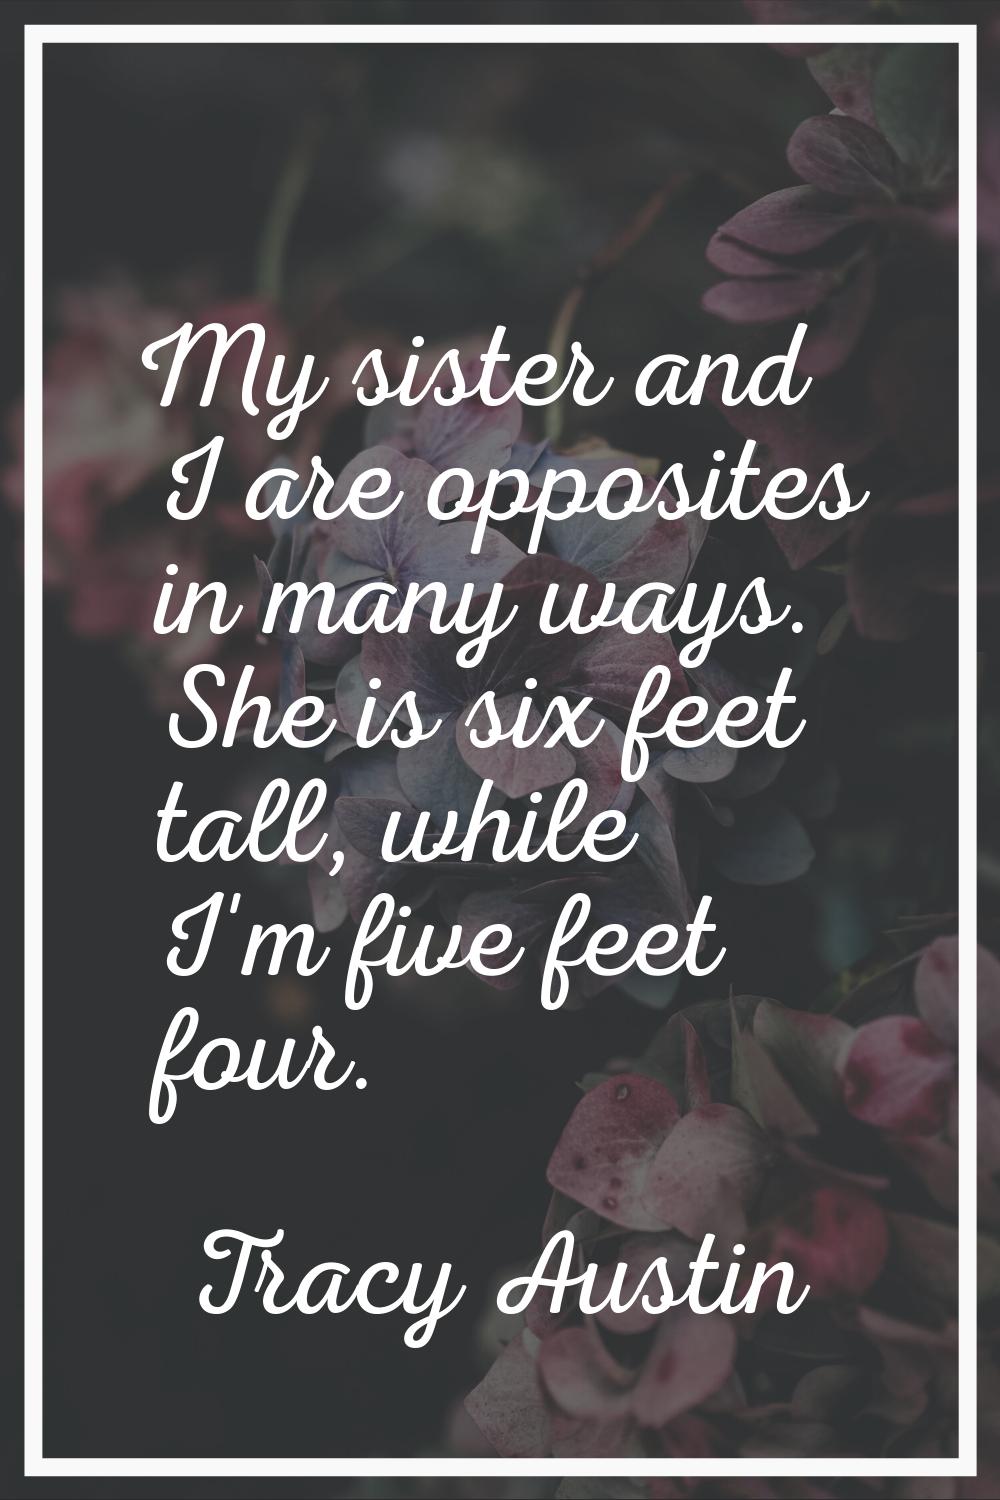 My sister and I are opposites in many ways. She is six feet tall, while I'm five feet four.